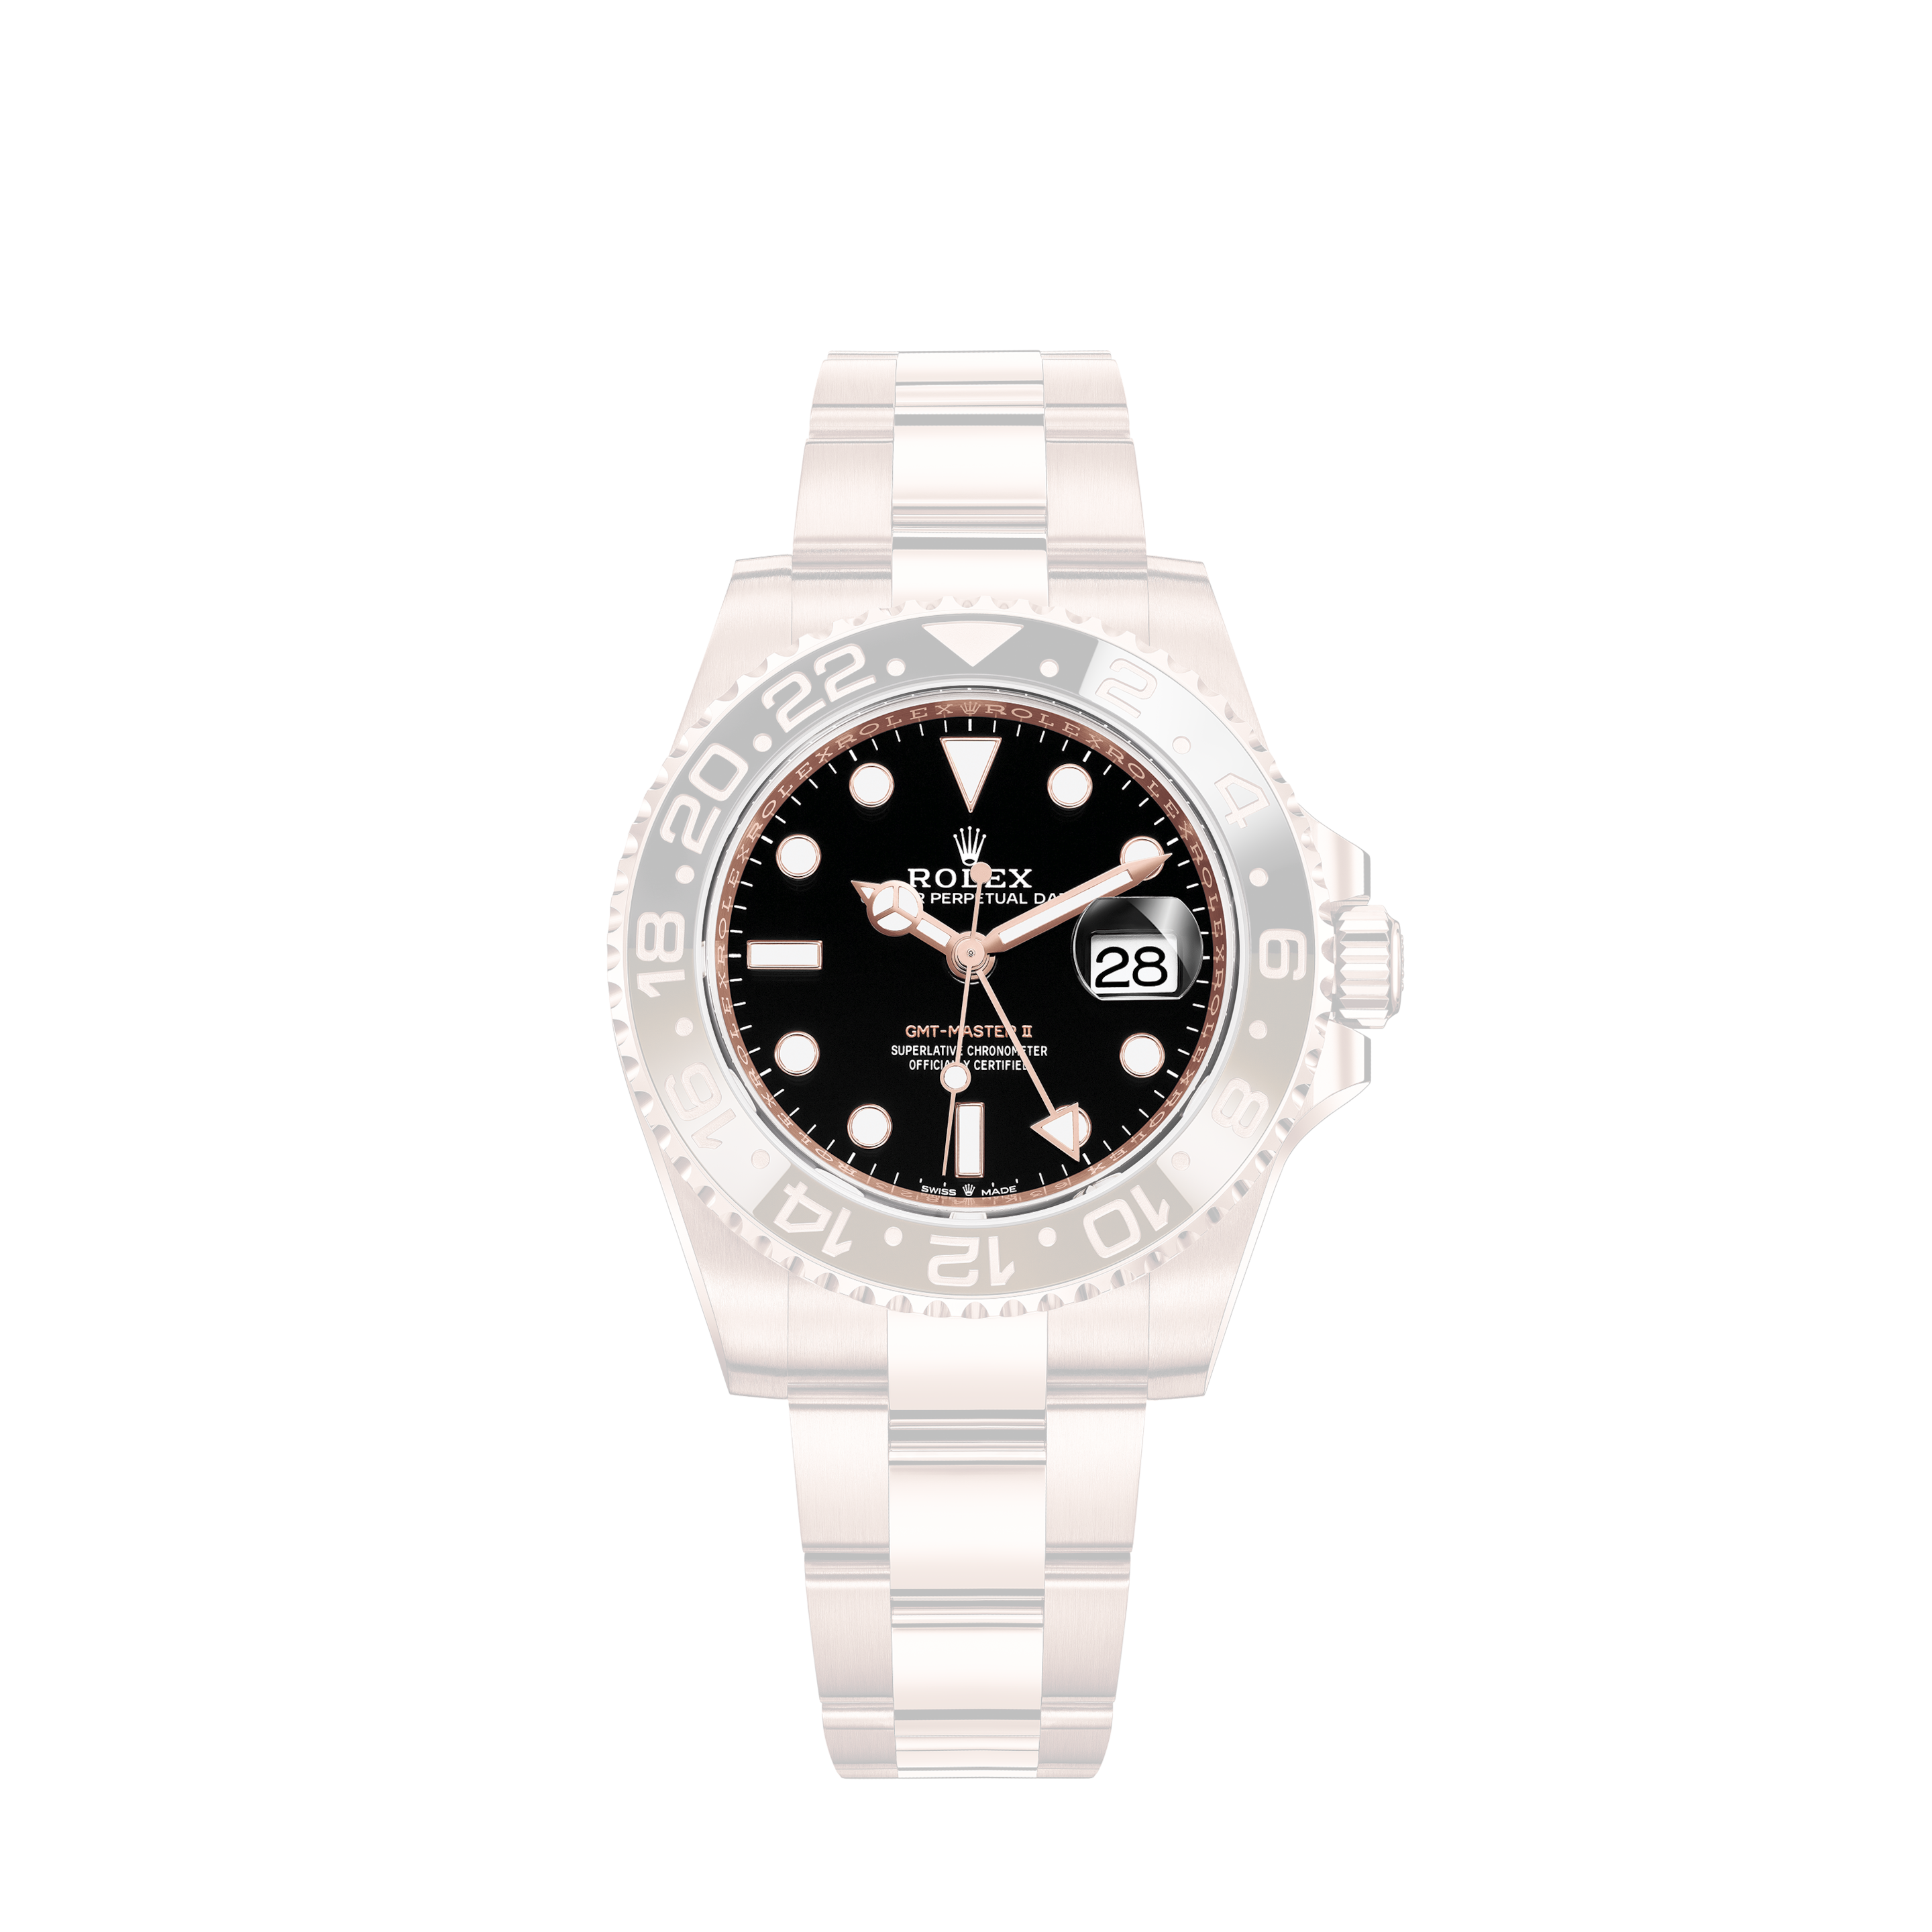 Rolex Submariner 116610lv - New 2019Rolex Datejust Turn O Graph 36mm 16263 Stahl Gelbgold 750 Automatik Gold Damen Stainless Steel 18kt Yellow Gold Jubilé-band Chronometer Oyster White